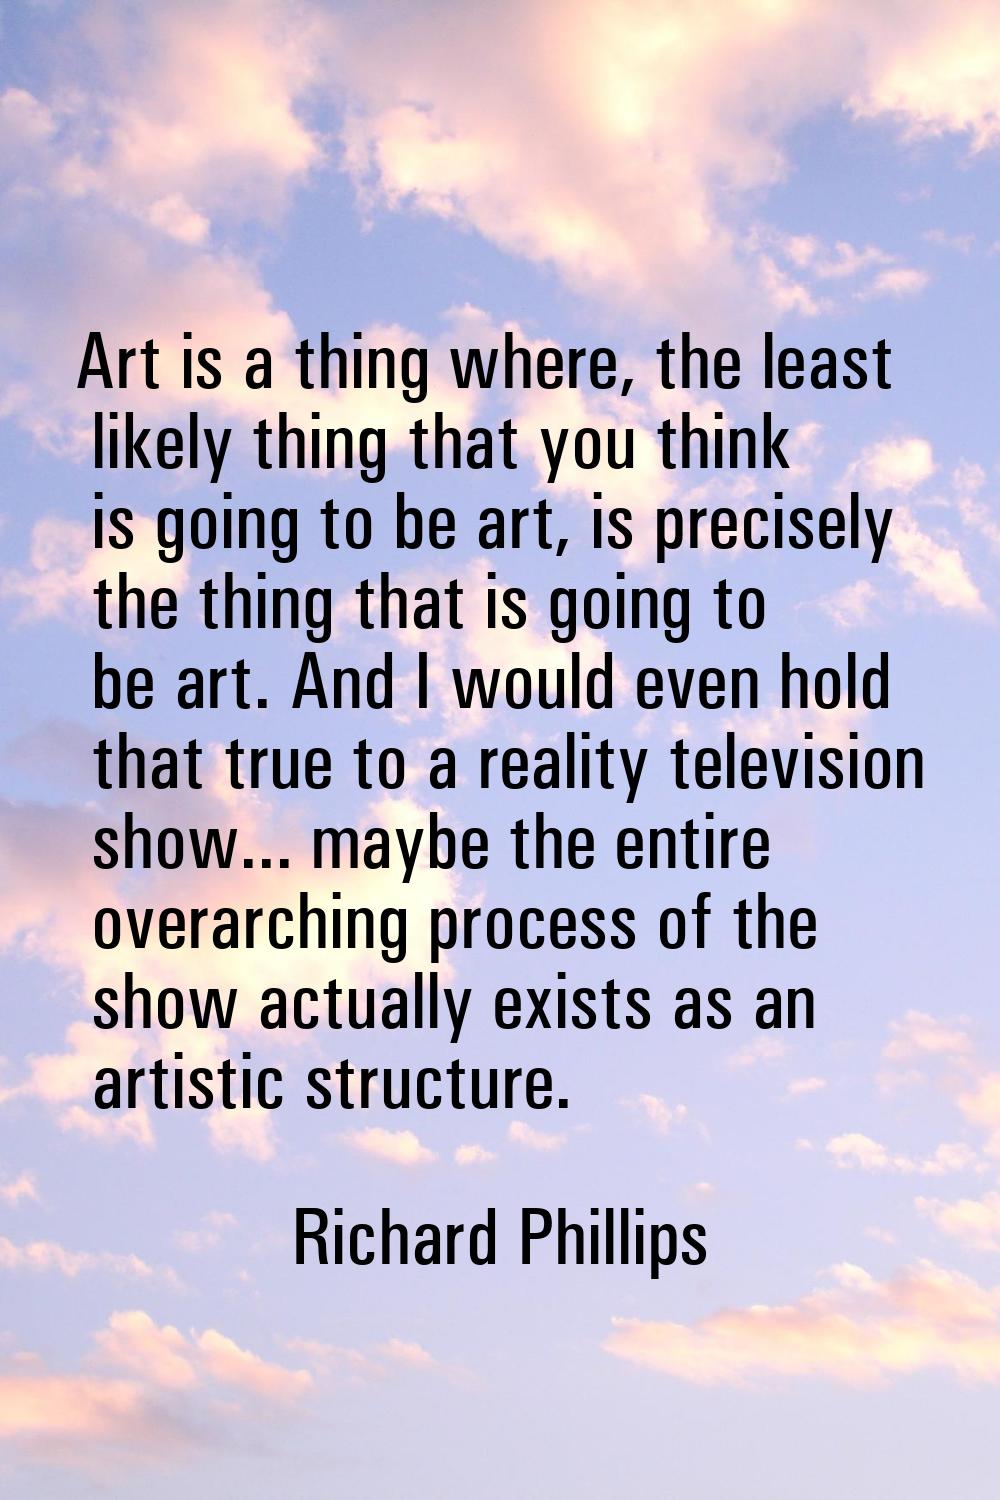 Art is a thing where, the least likely thing that you think is going to be art, is precisely the th